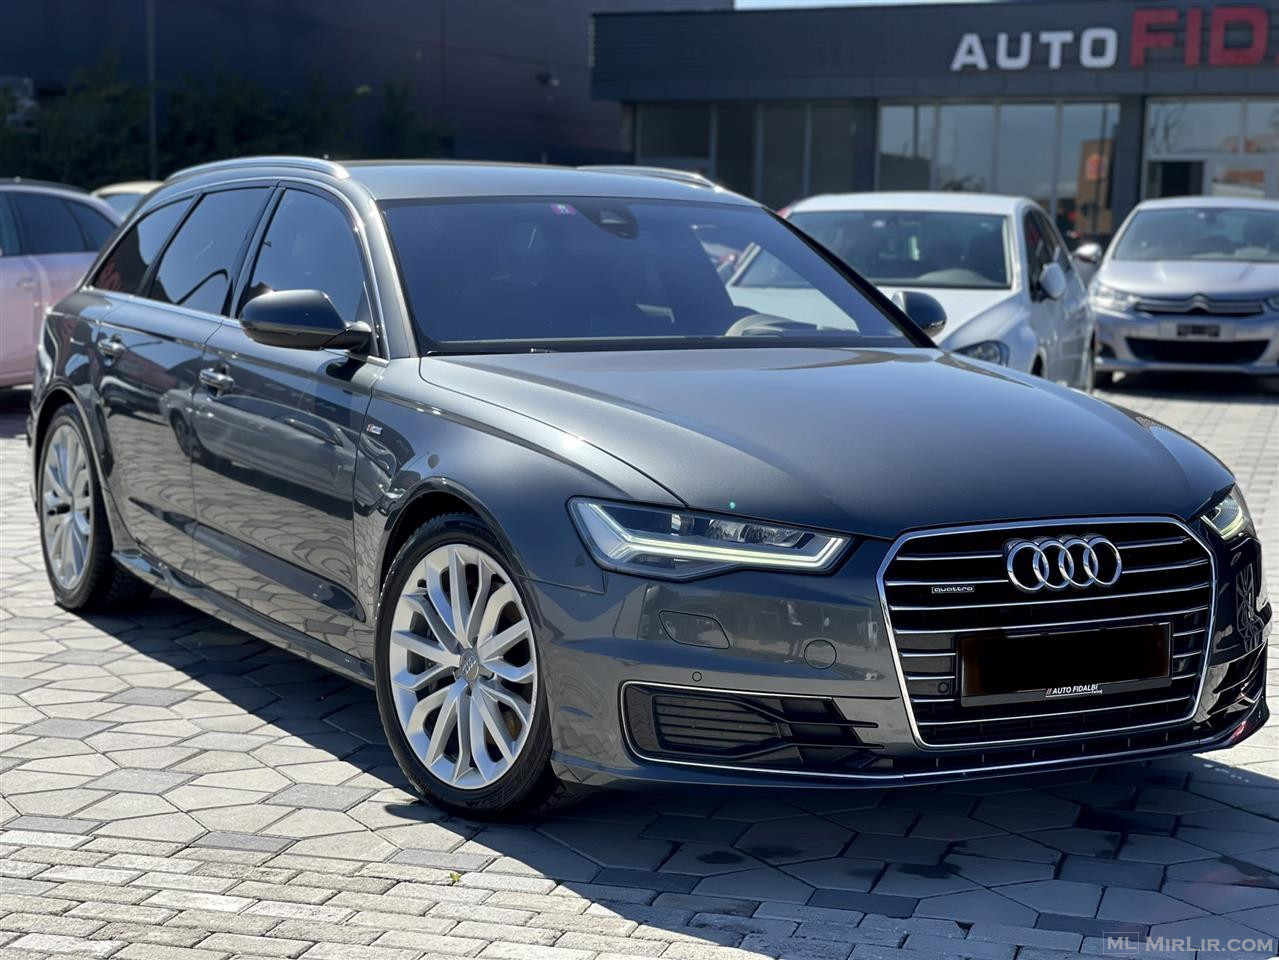 AUDI A6 *SOUND SYSTEM* 3.0 BiTDI 326 PS COMPETITION S-Line 